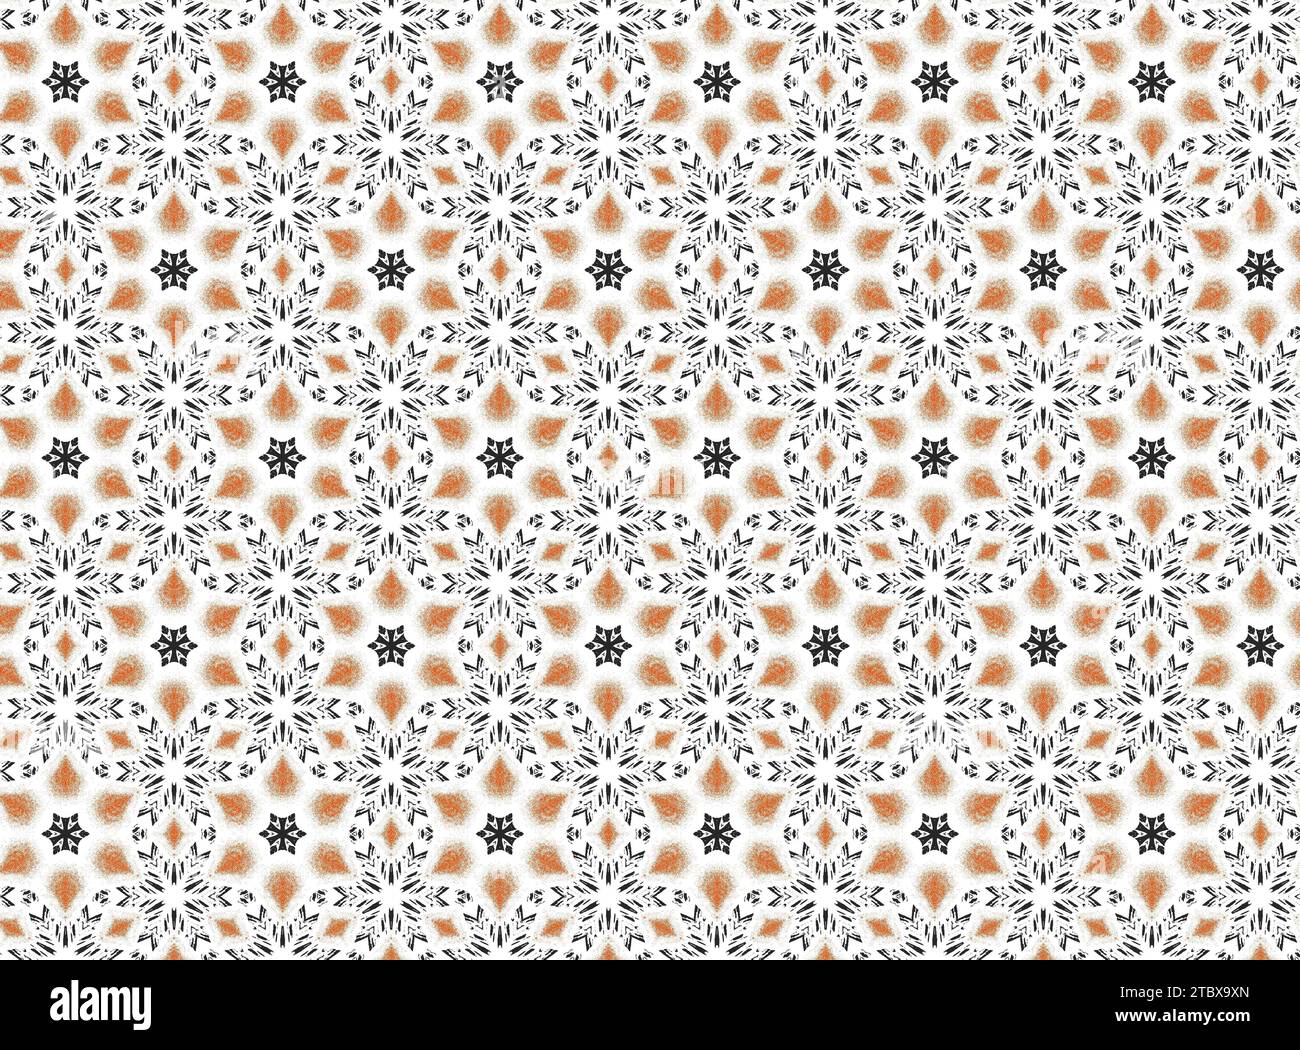 This abstract background features a vibrant orange background with black circles, flowers and snowflakes in a repeating pattern Stock Photo